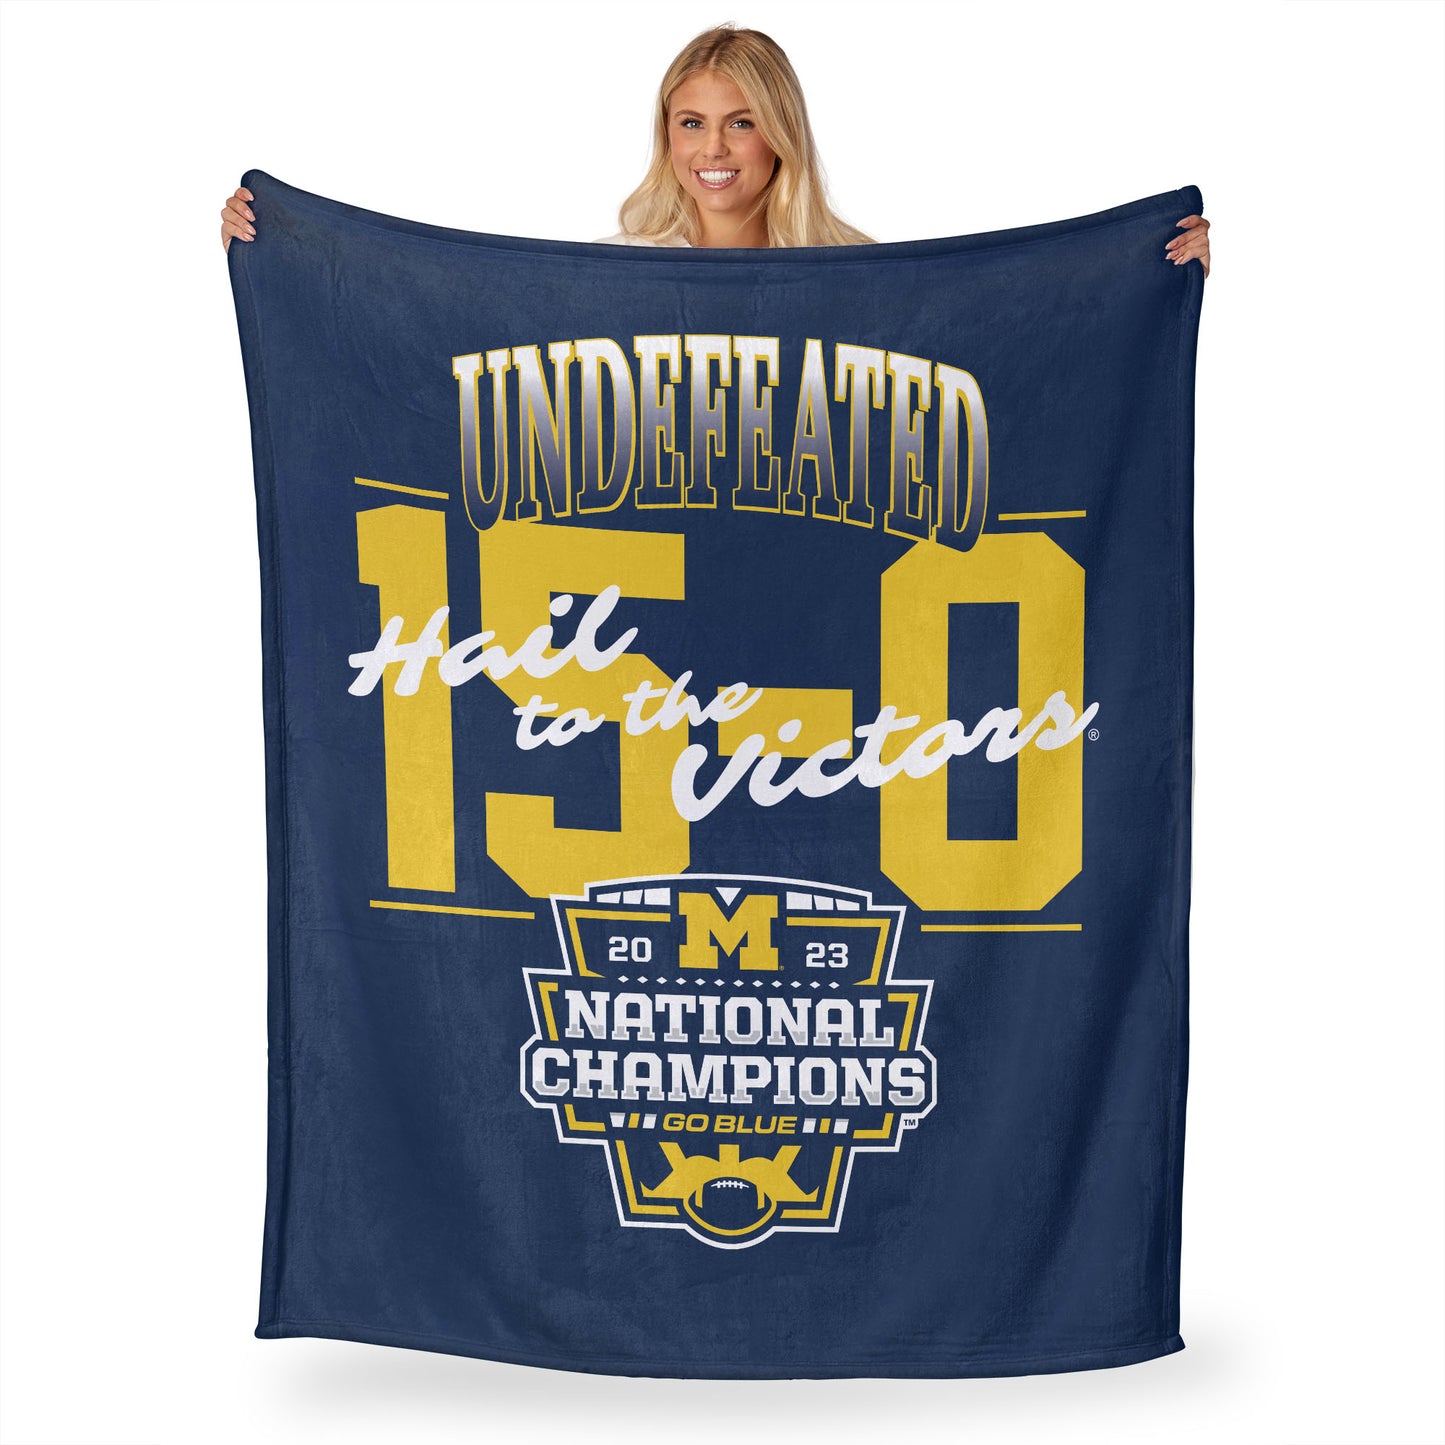 Michigan Wolverines Undefeated NCAA Football Champs throw blanket 2